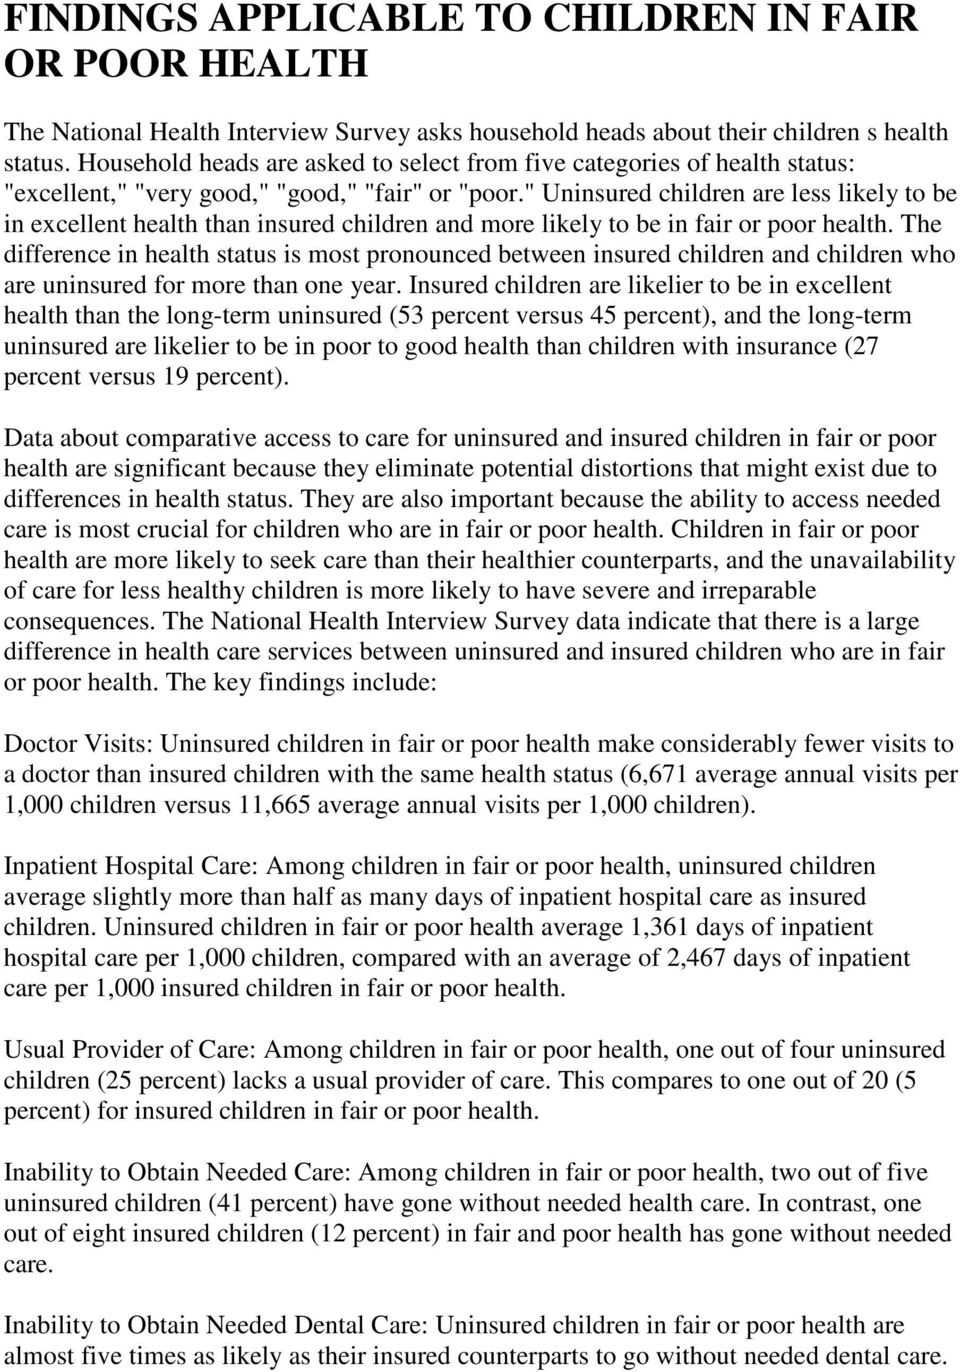 " Uninsured children are less likely to be in excellent health than insured children and more likely to be in fair or poor health.